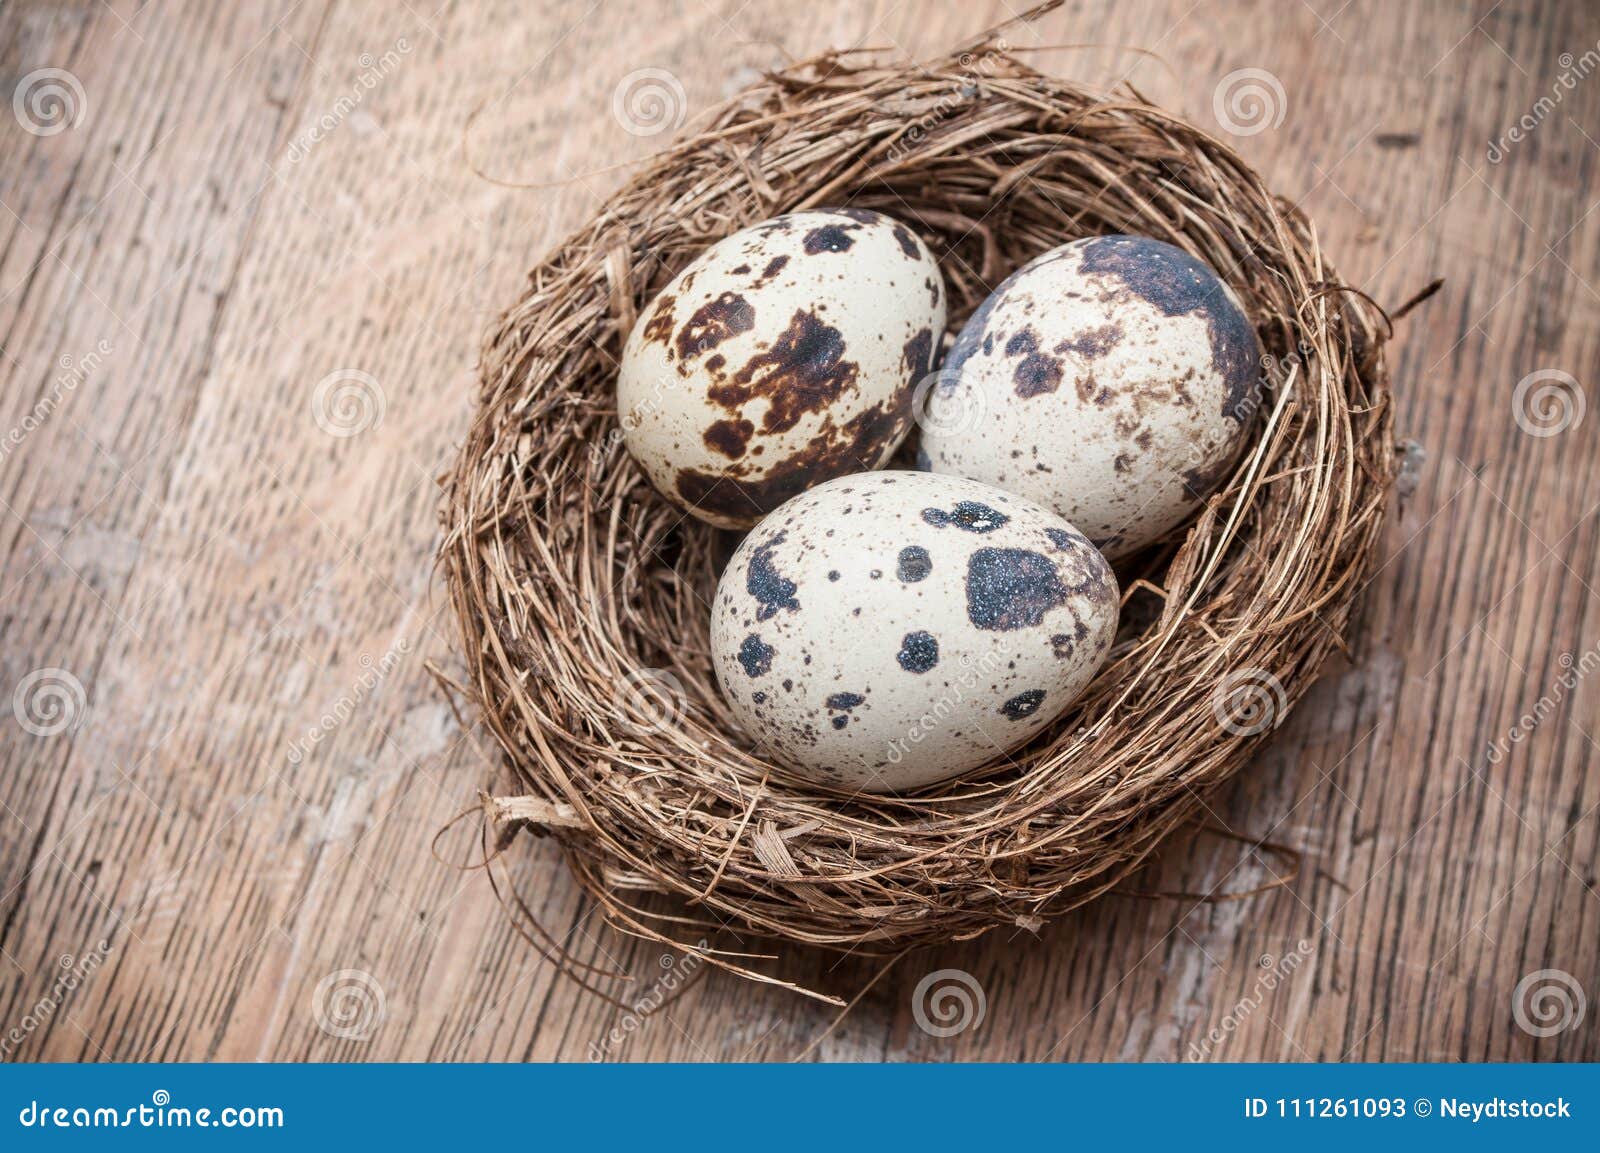 quail eggs in nest top vieuw on wooden table backgrou